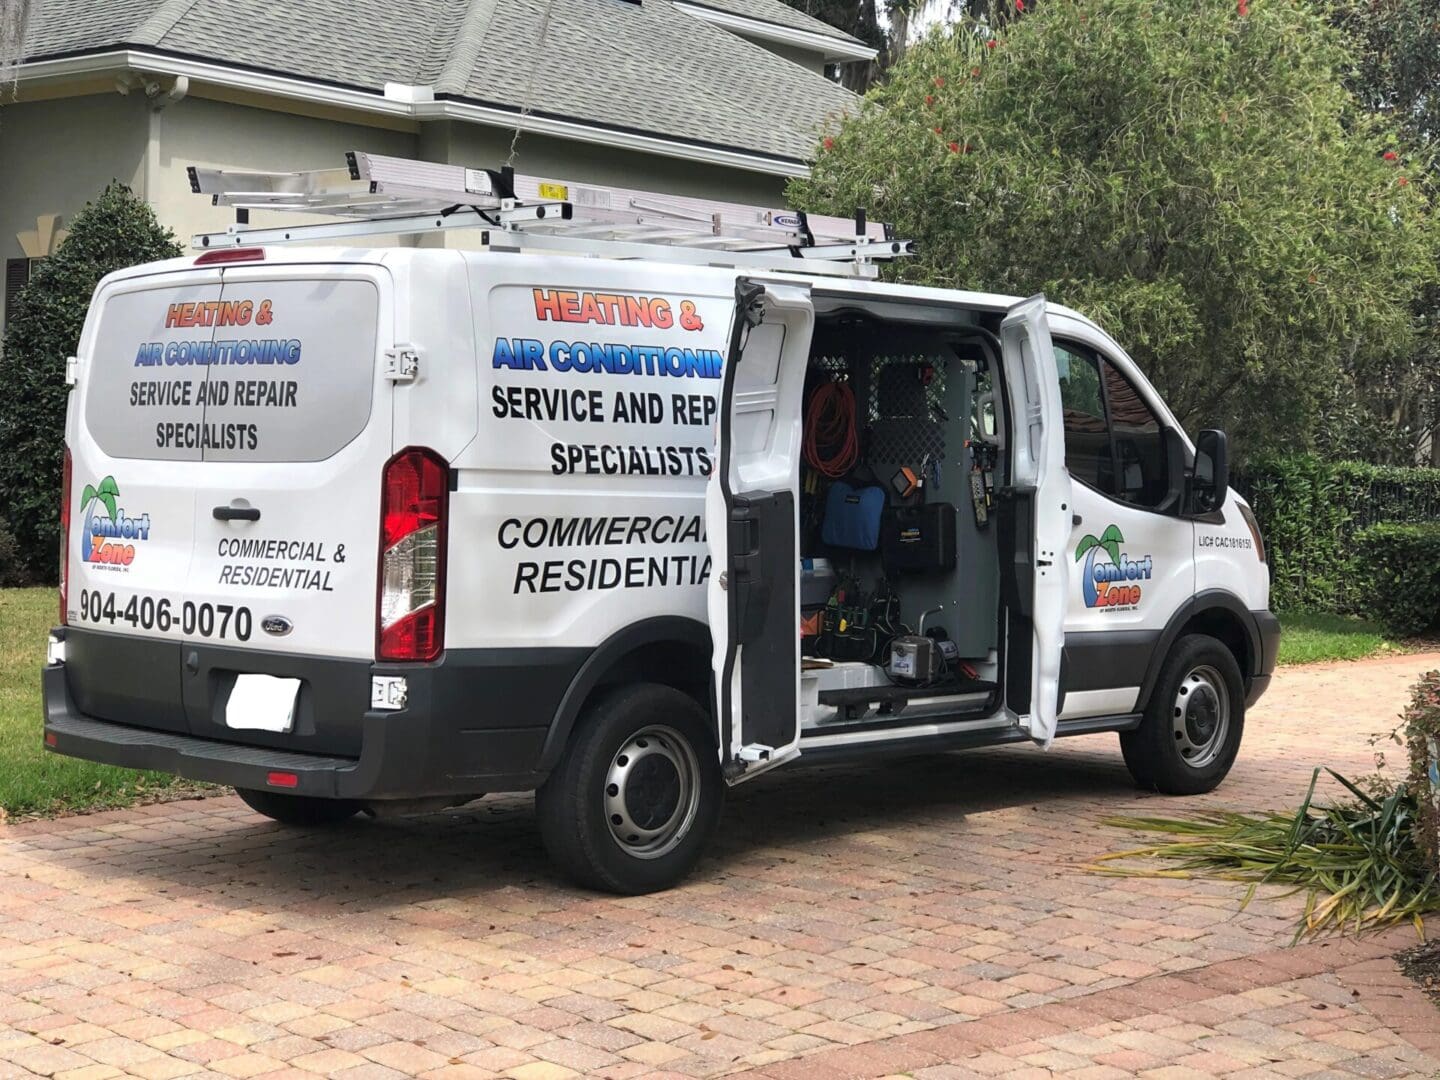 A white hvac service van with open back doors, revealing tools and equipment, parked in a residential driveway.